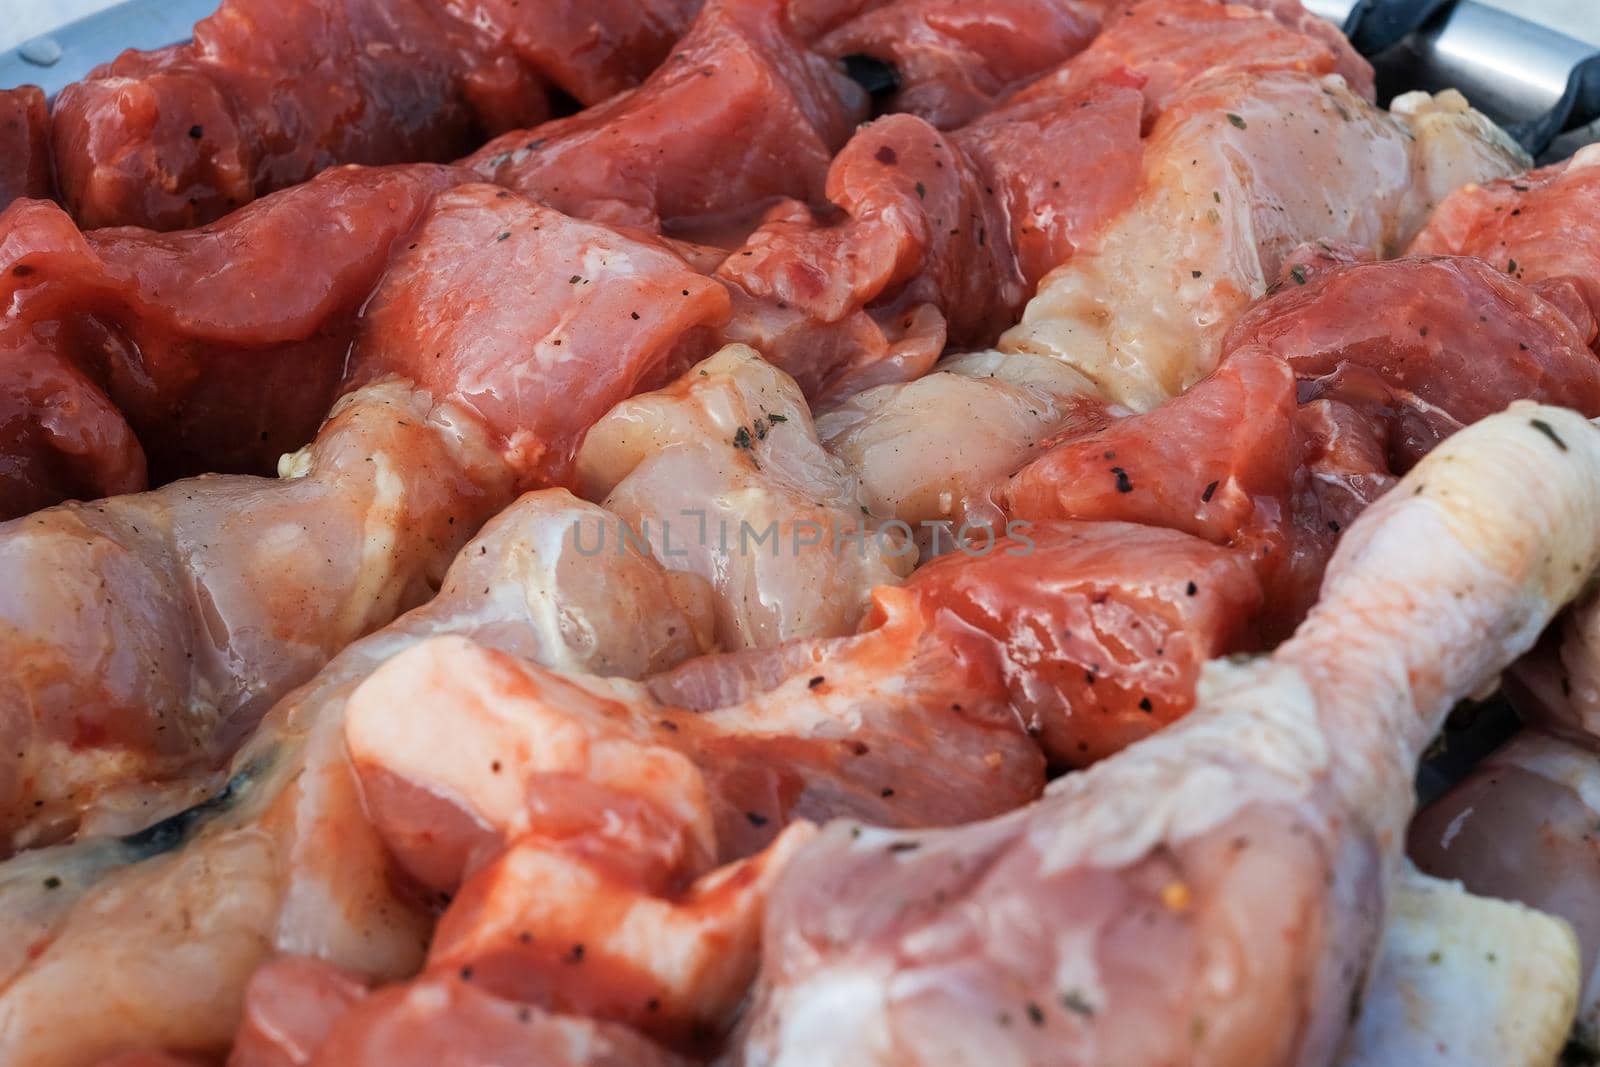 Raw pork skewers and chicken thighs cut into pieces and on skewers closeup.